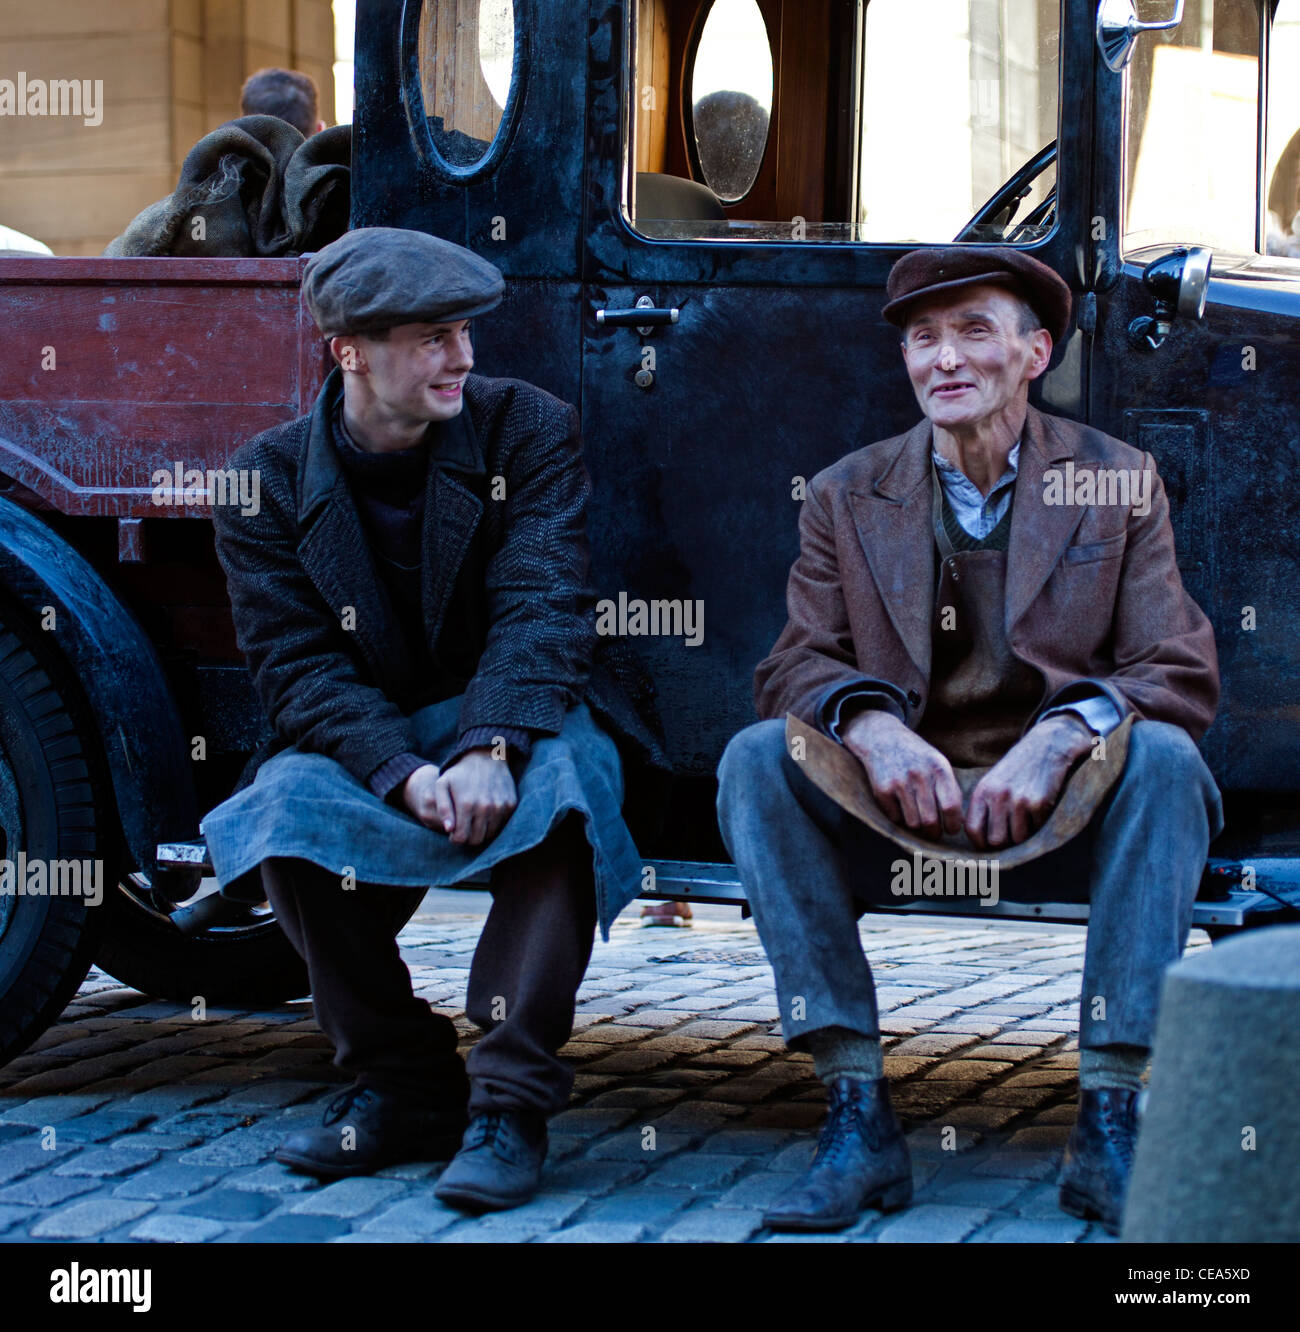 Man and boy in vintage outfits dressed as coalmen sitting on step of old fashioned truck Edinburgh Scotland UK Stock Photo